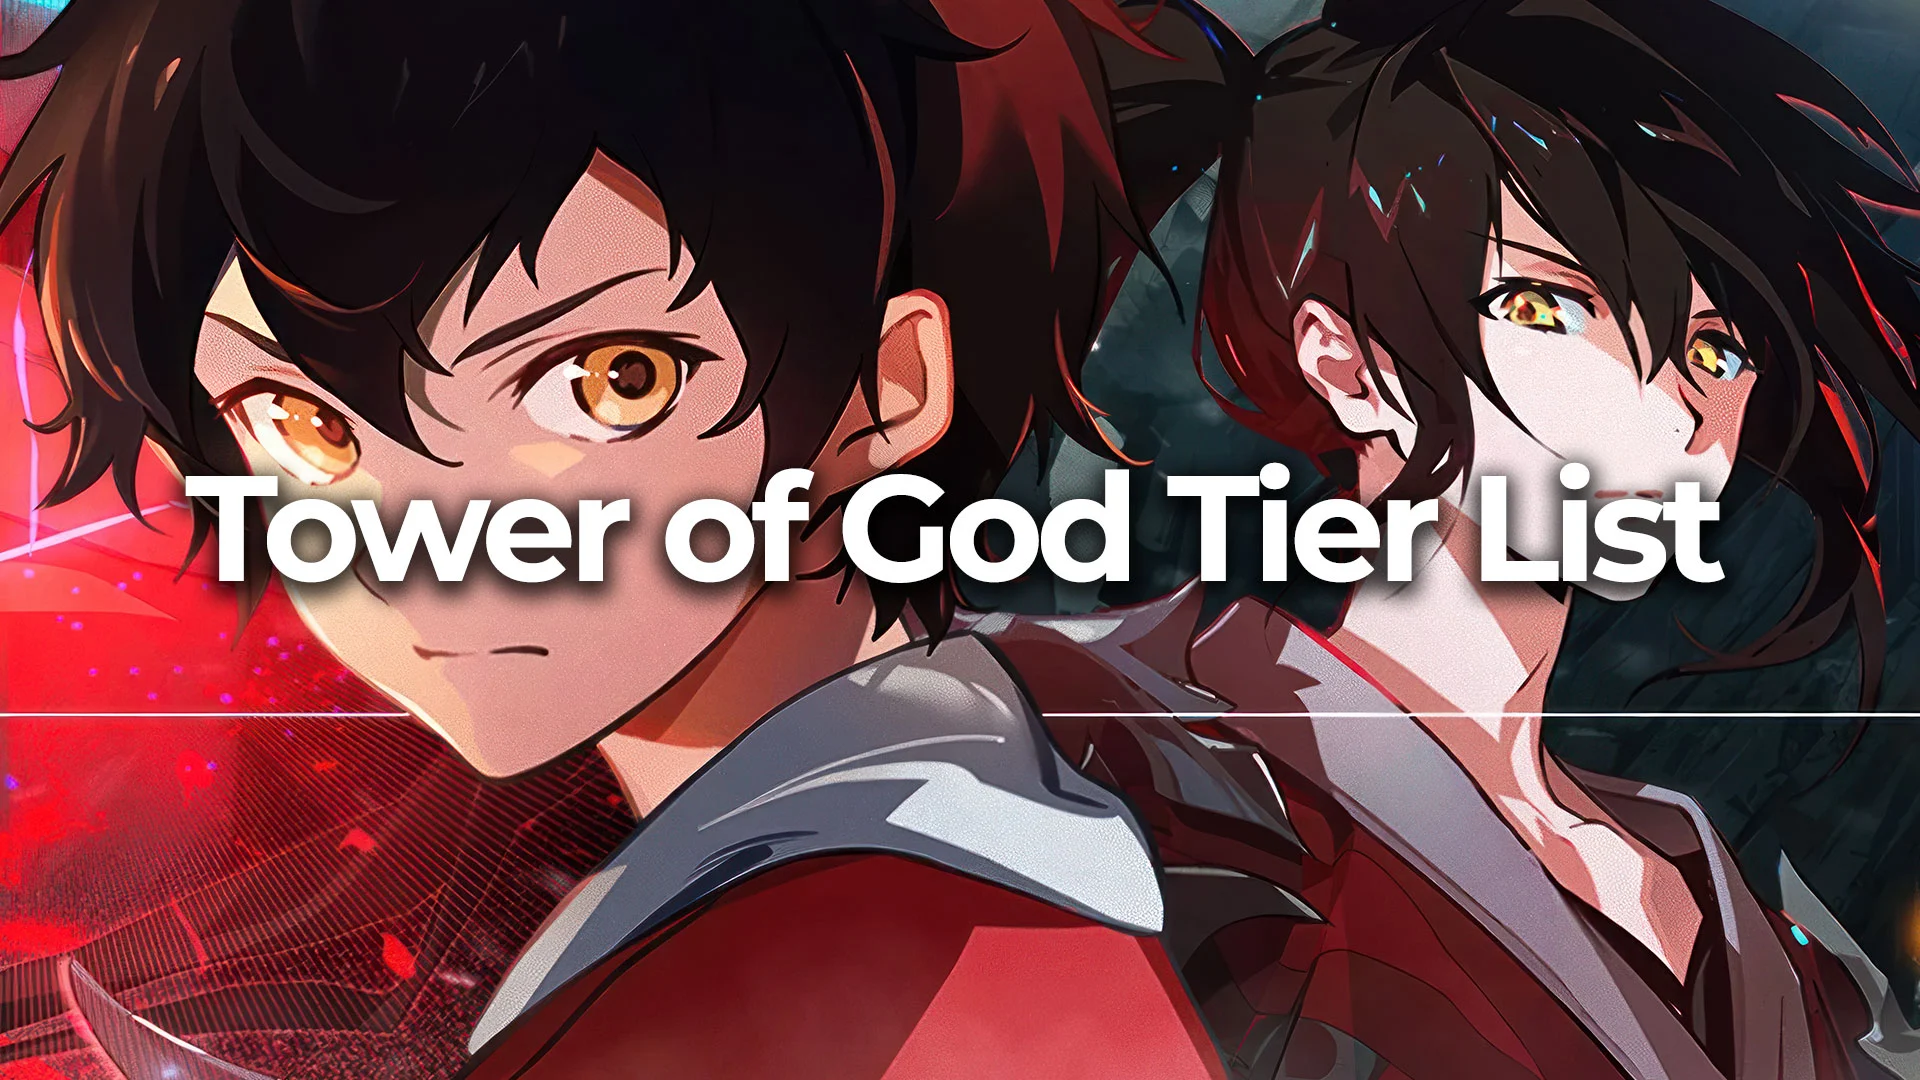 Tower of God Tier List